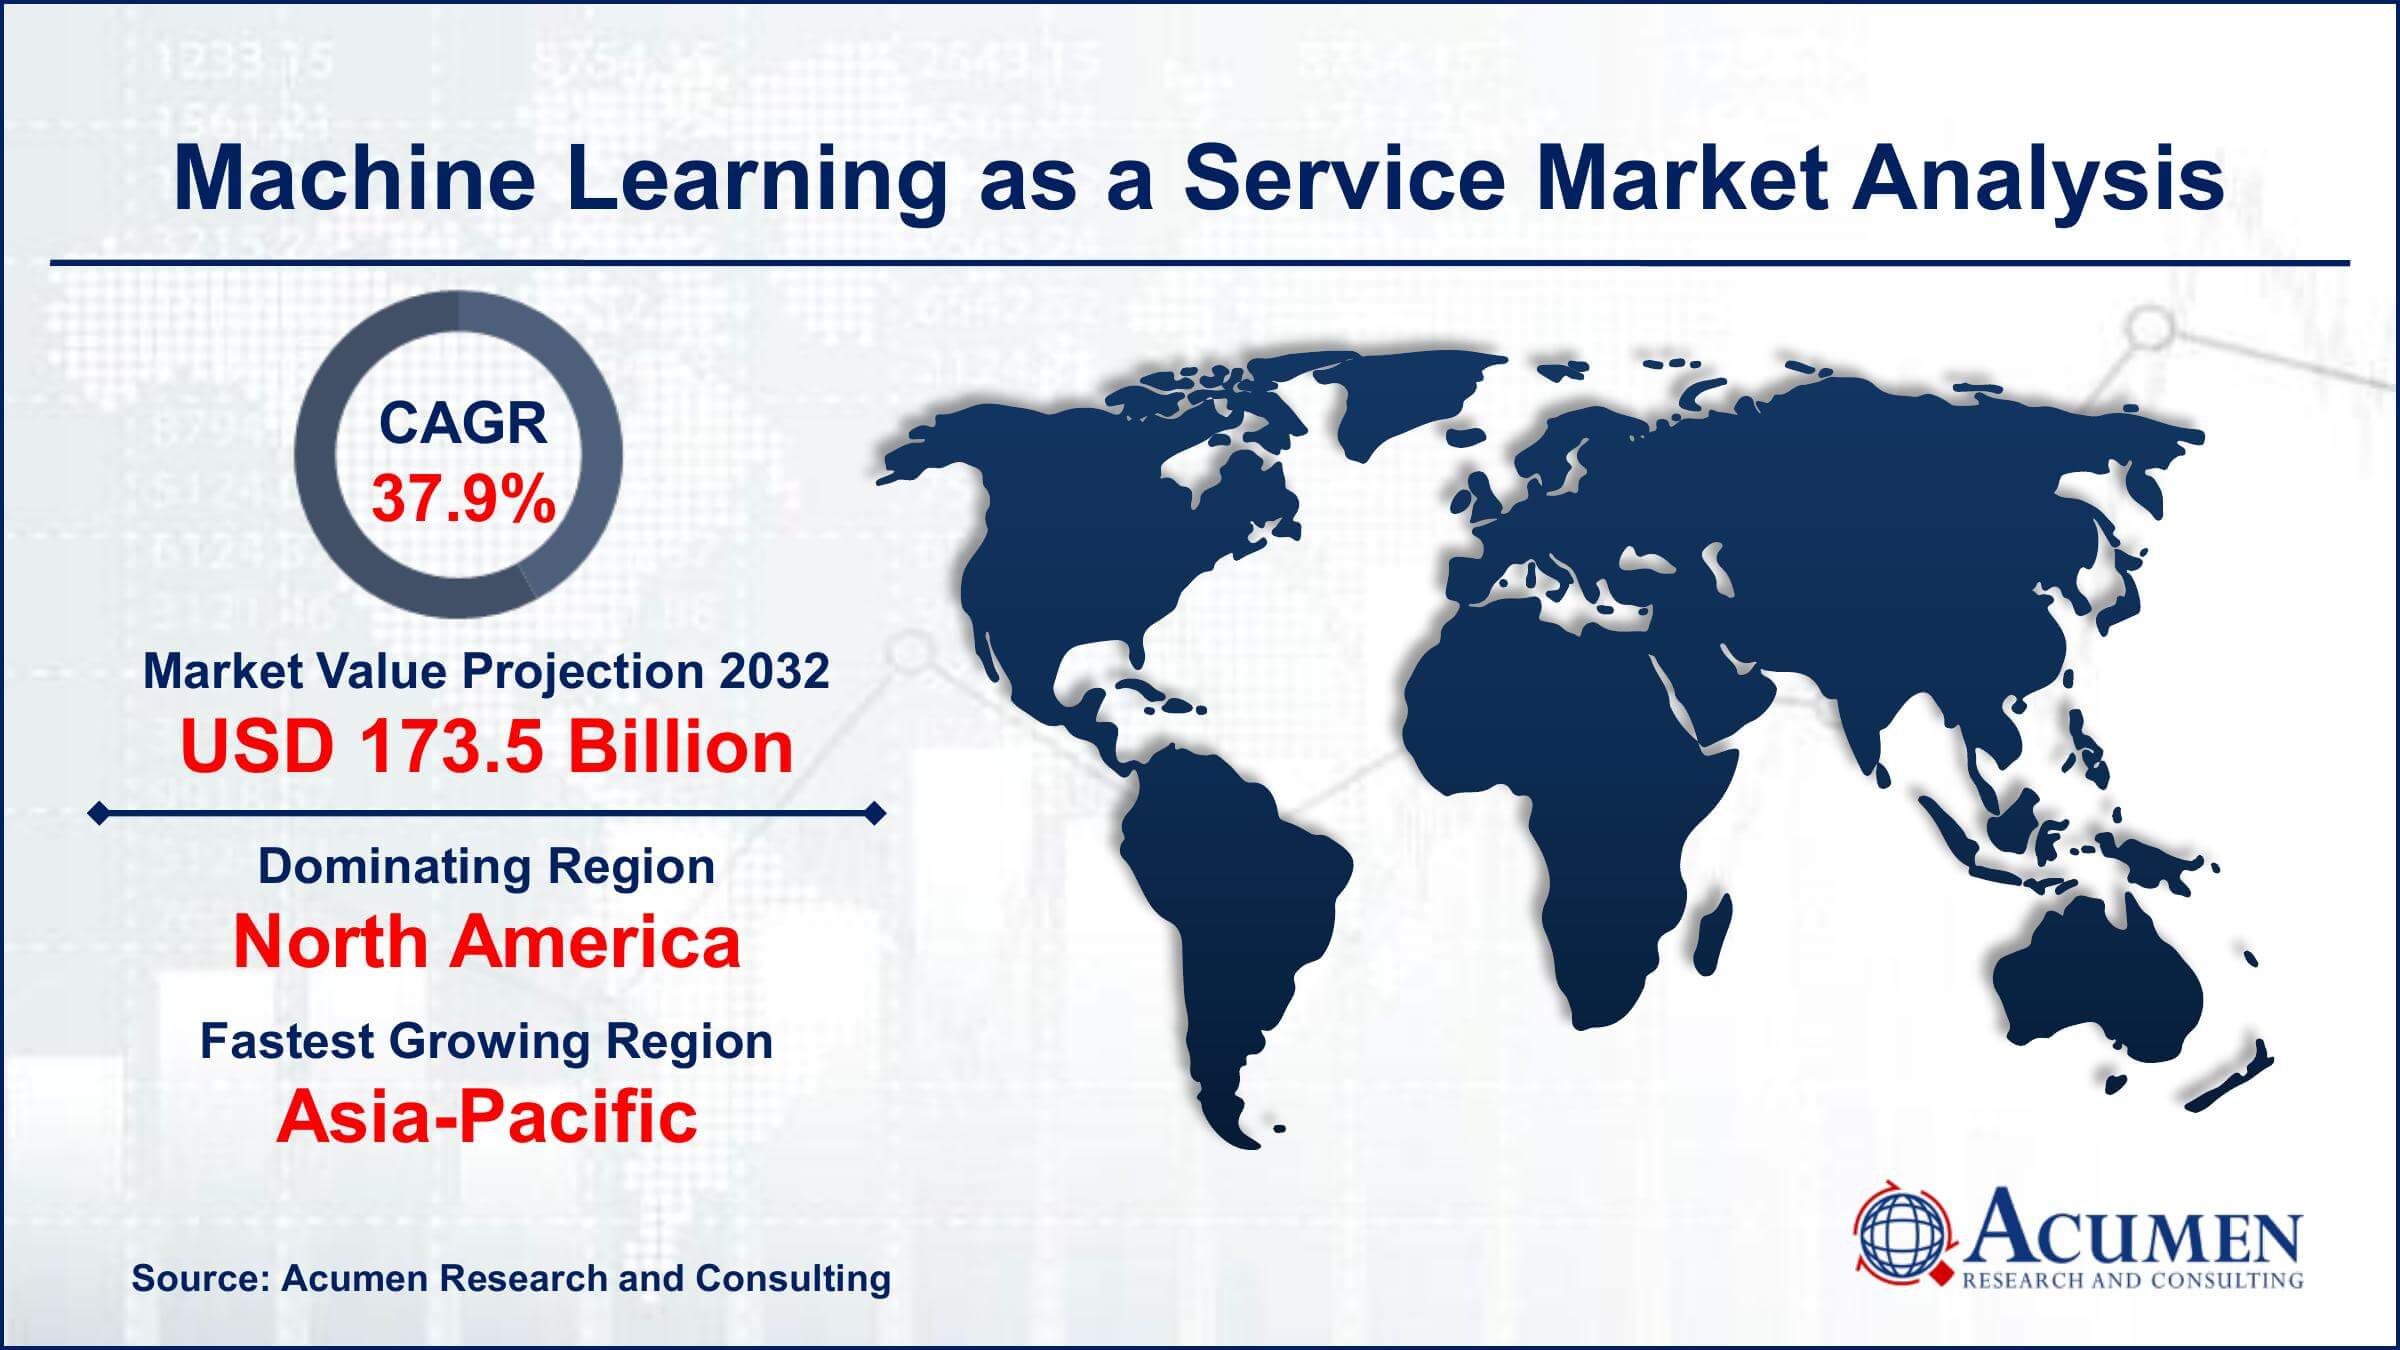 Global Machine Learning as a Service Market Trends